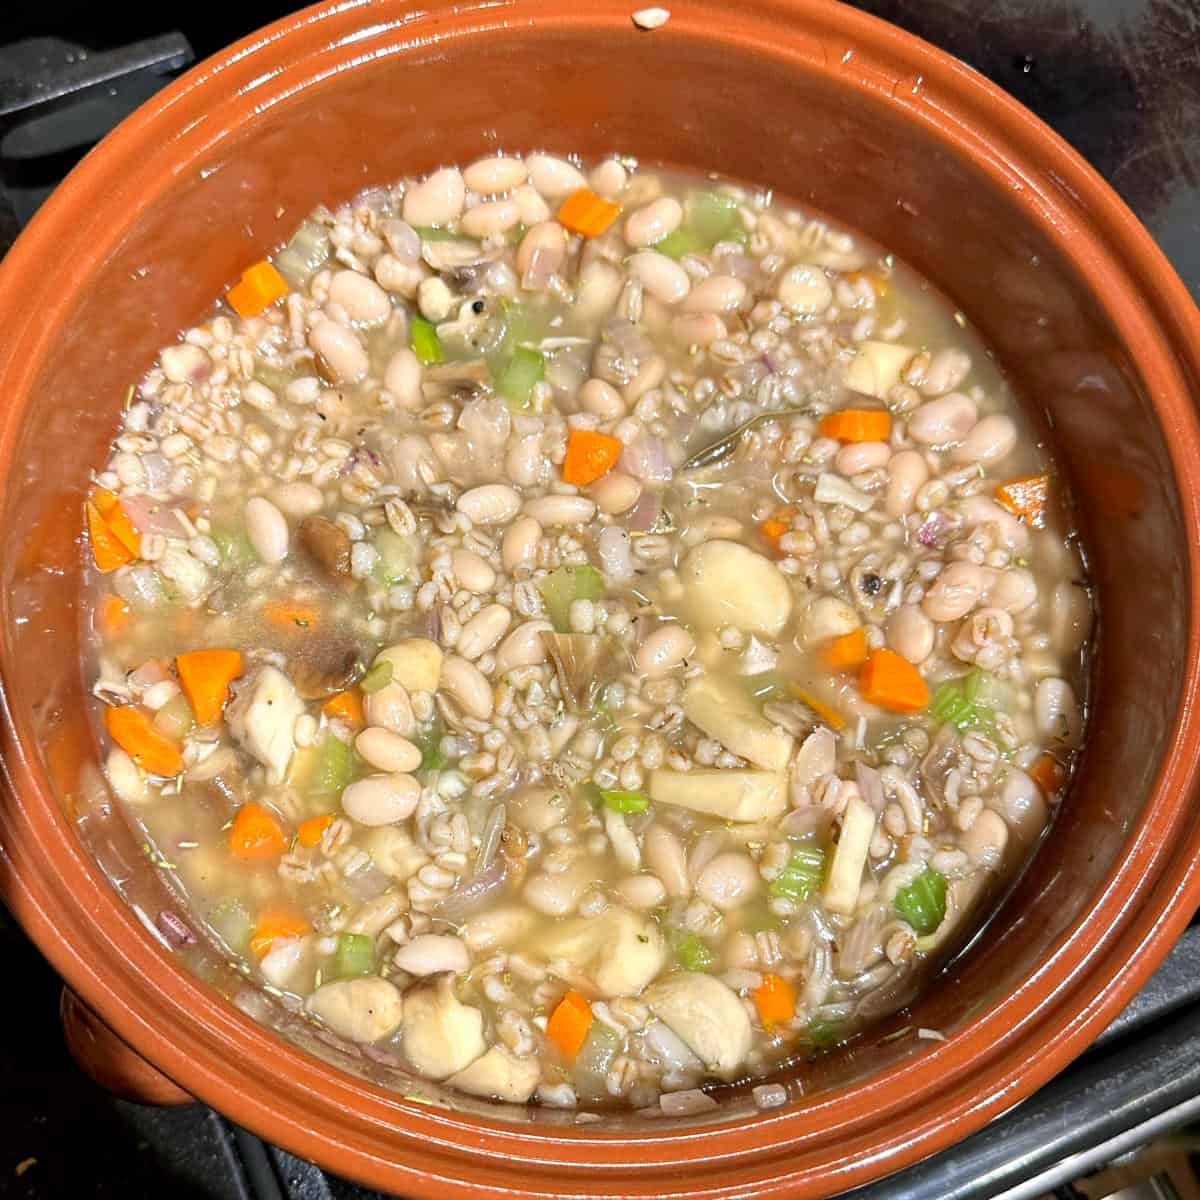 Cooked barley and beans added to pot with veggies.